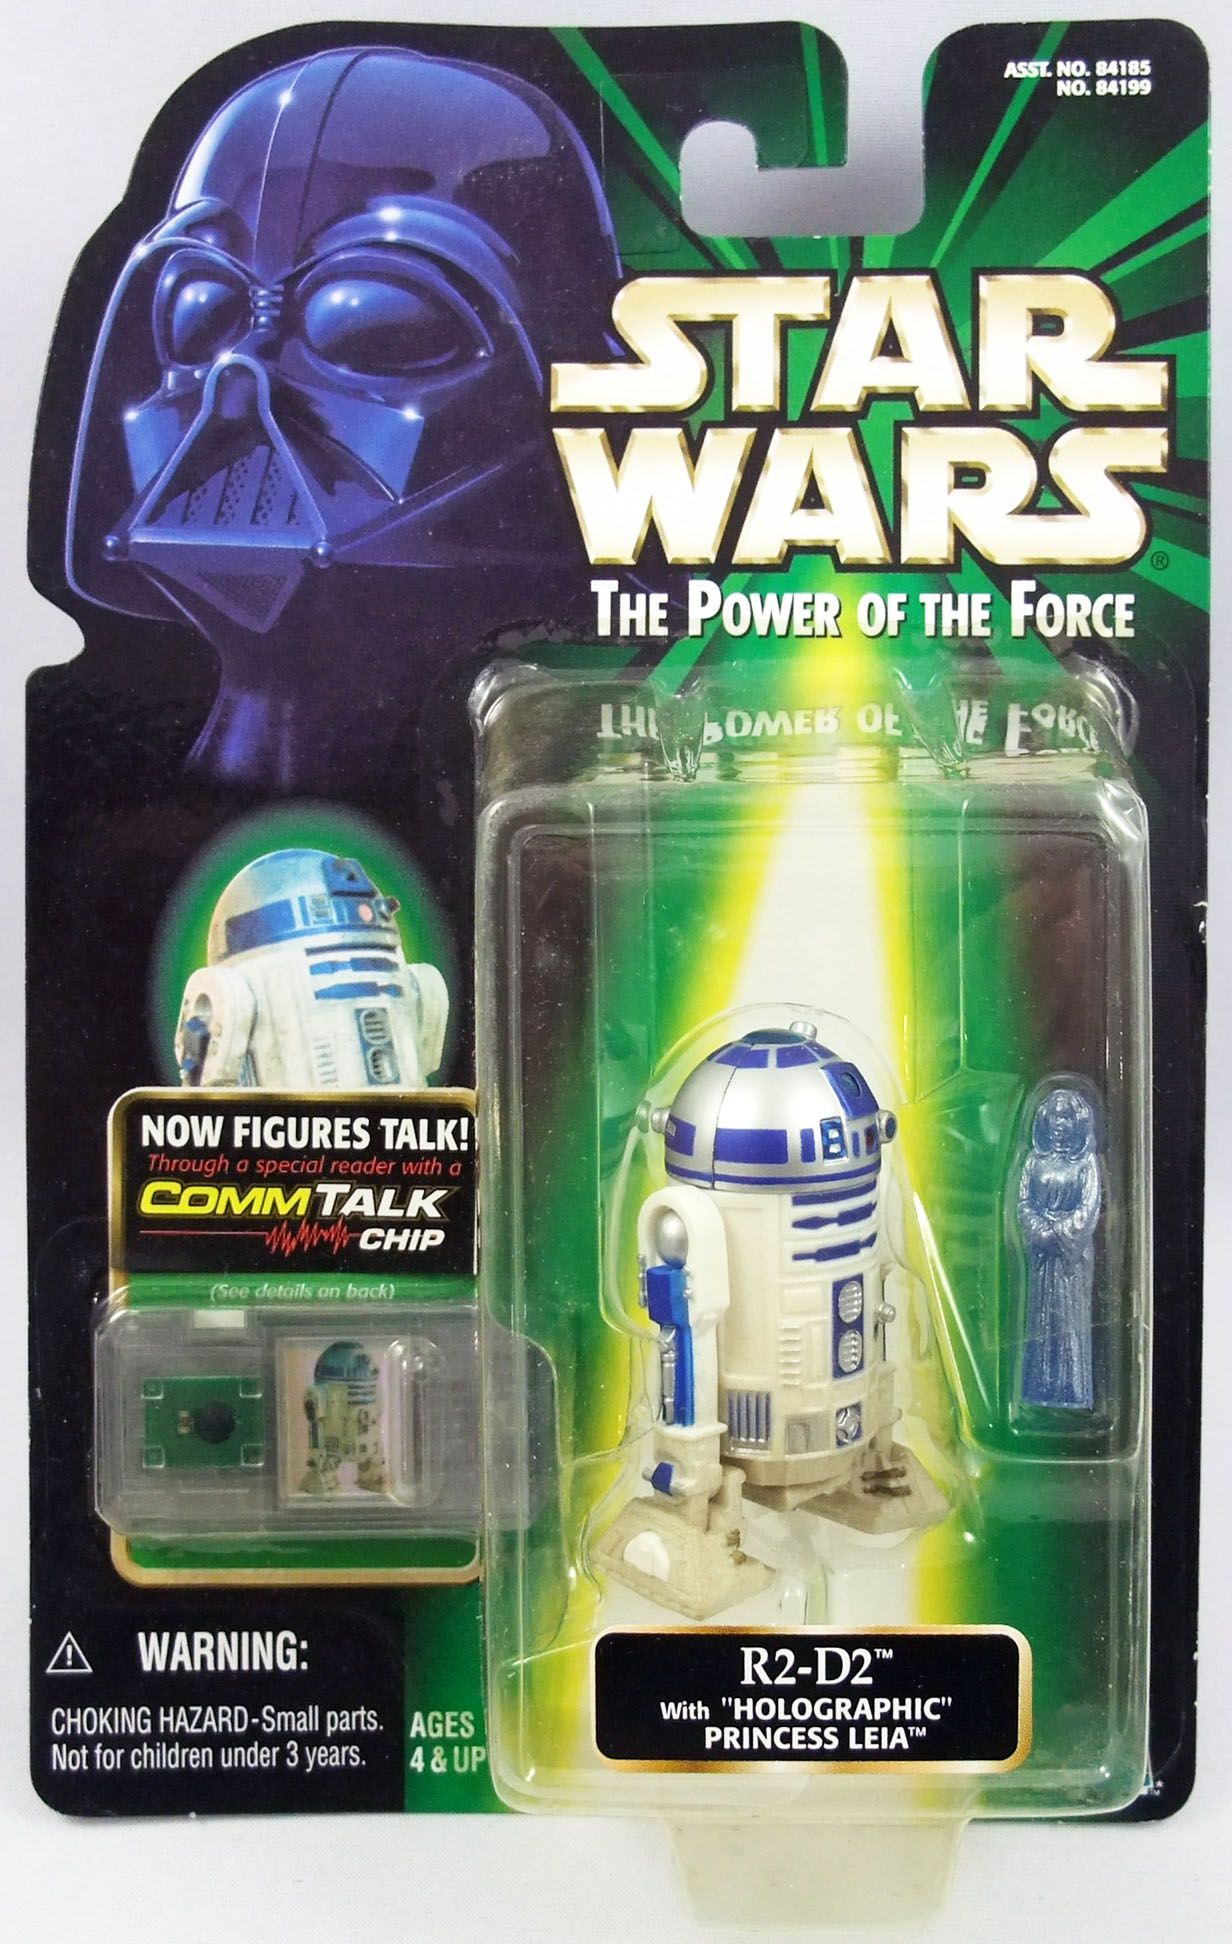 Star Wars Power of the Force Electronic Power F/X R2-D2 Action Figure SW-37 